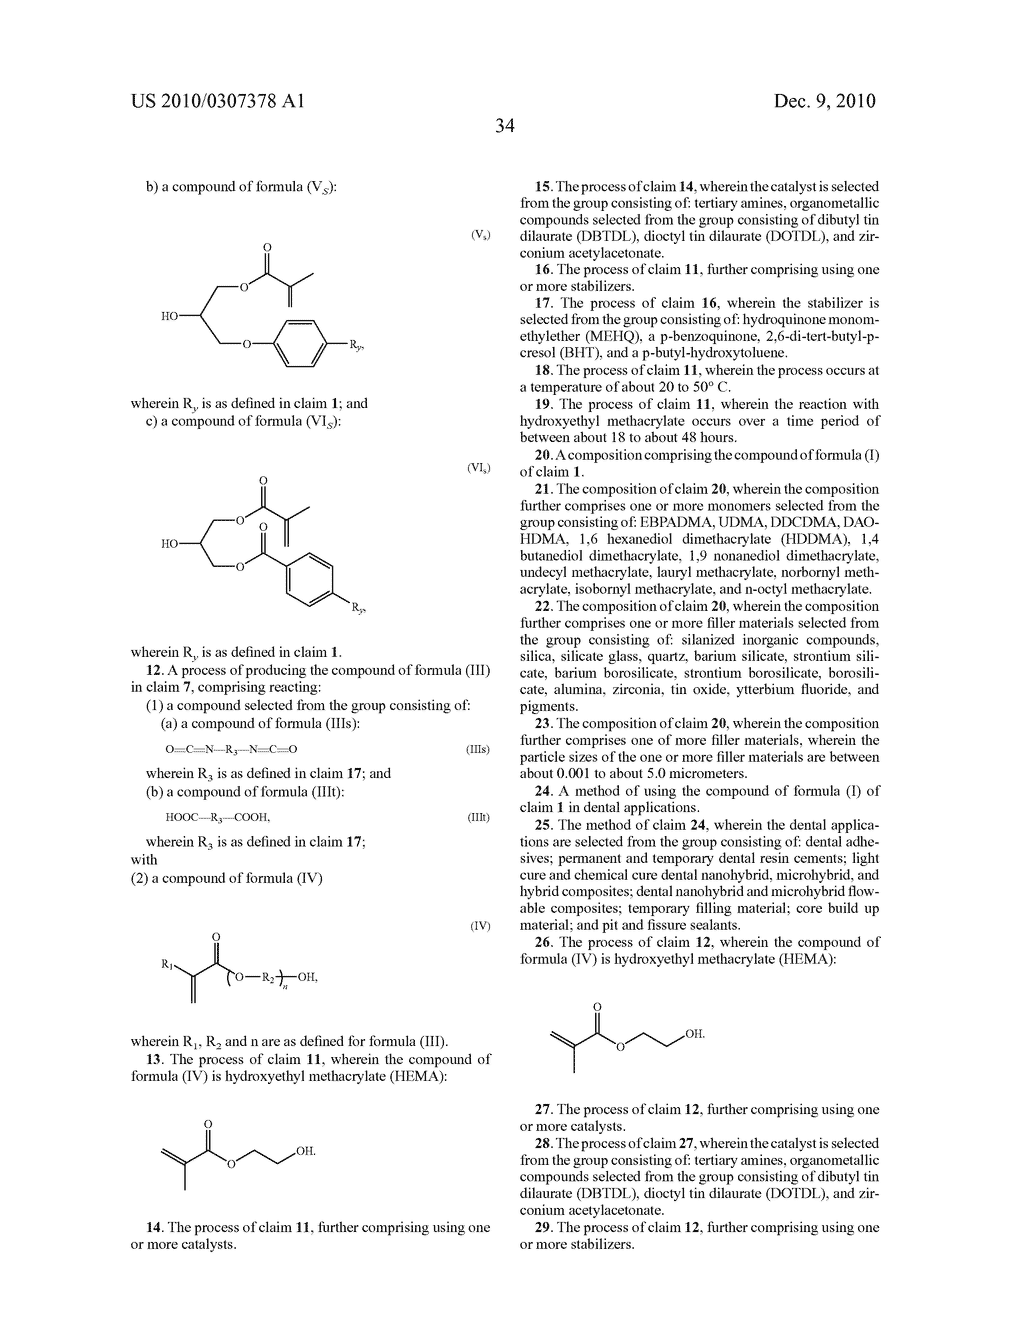 CARBAMATE-METHACRYLATE MONOMERS AND THEIR USE IN DENTAL APPLICATIONS - diagram, schematic, and image 46